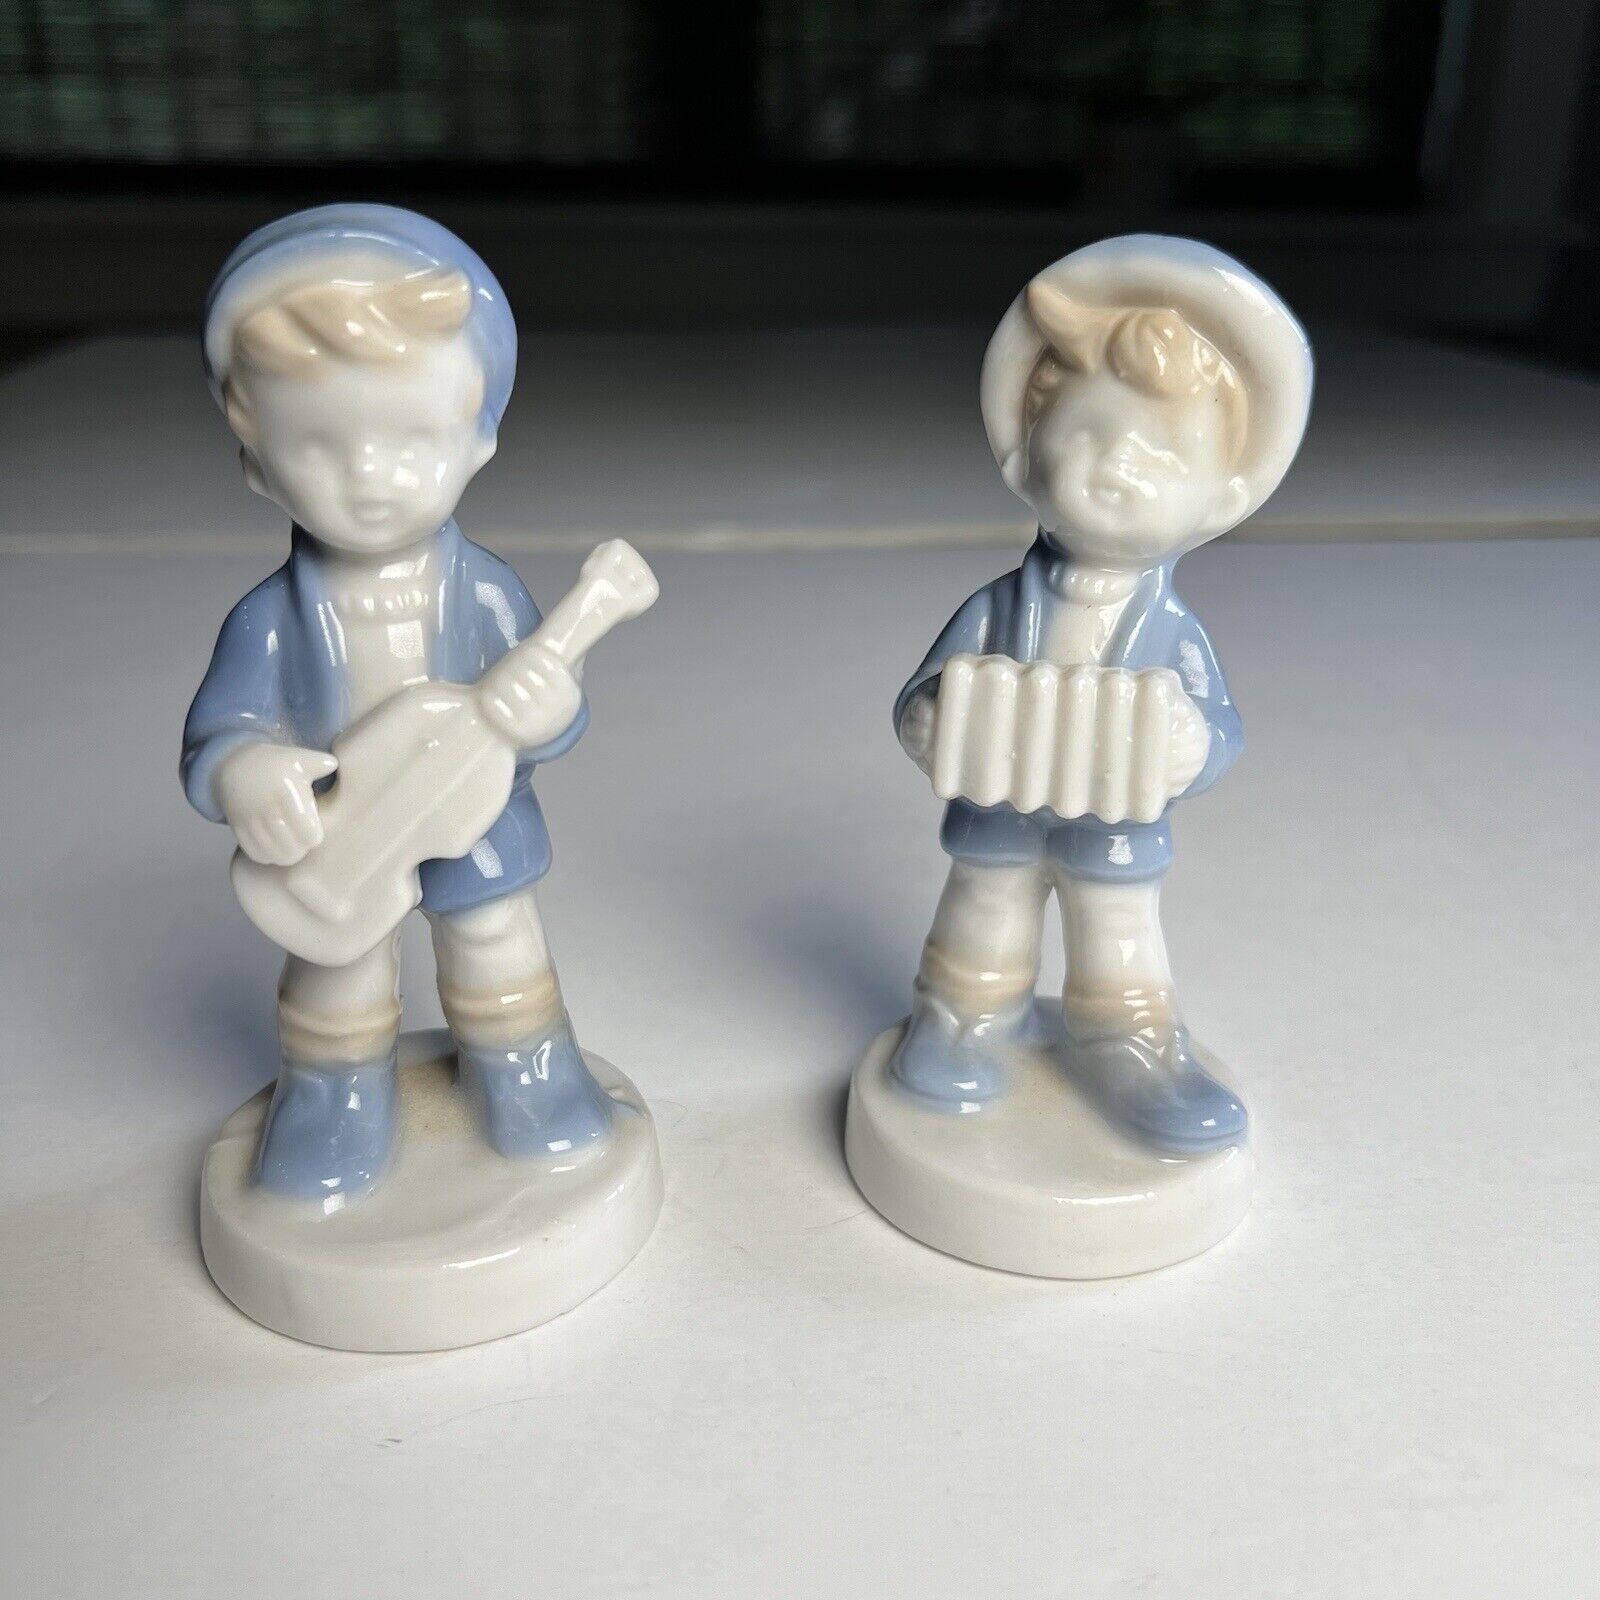 music figurines boy with accordian and boy with violin made in japan, Porcelain